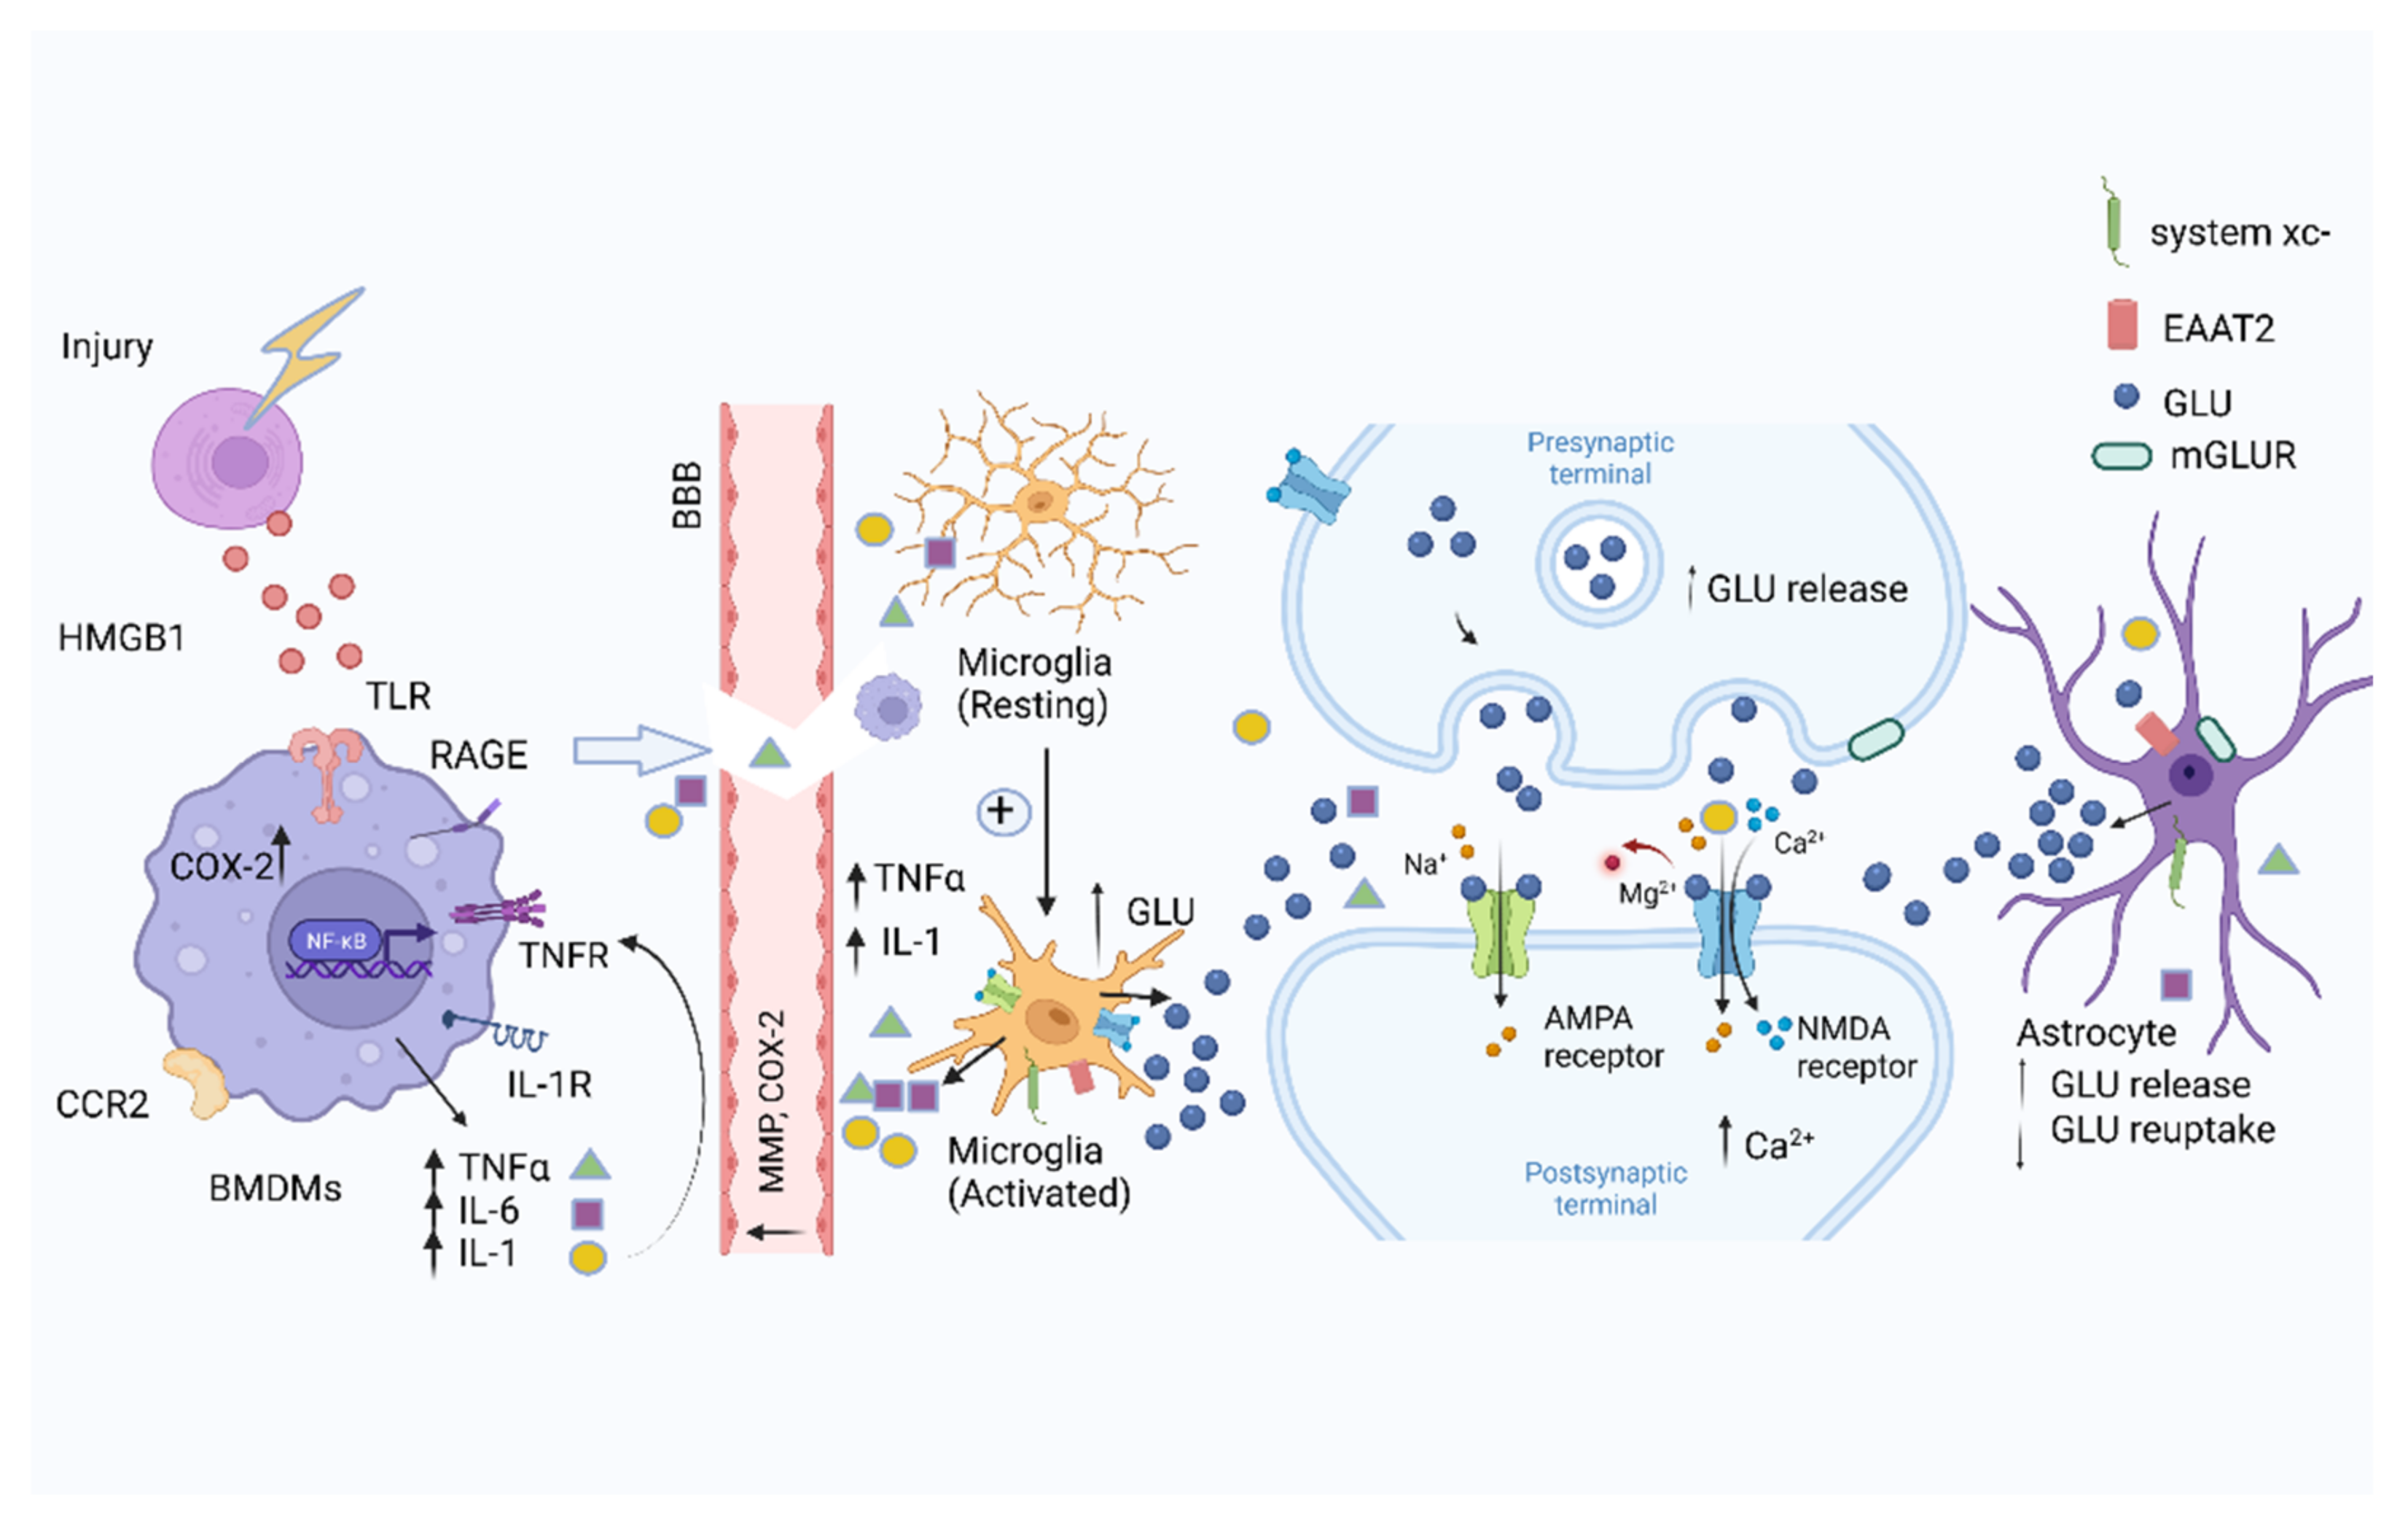 Glutamate transporters: the regulatory proteins for excitatory/excitotoxic  glutamate in brain